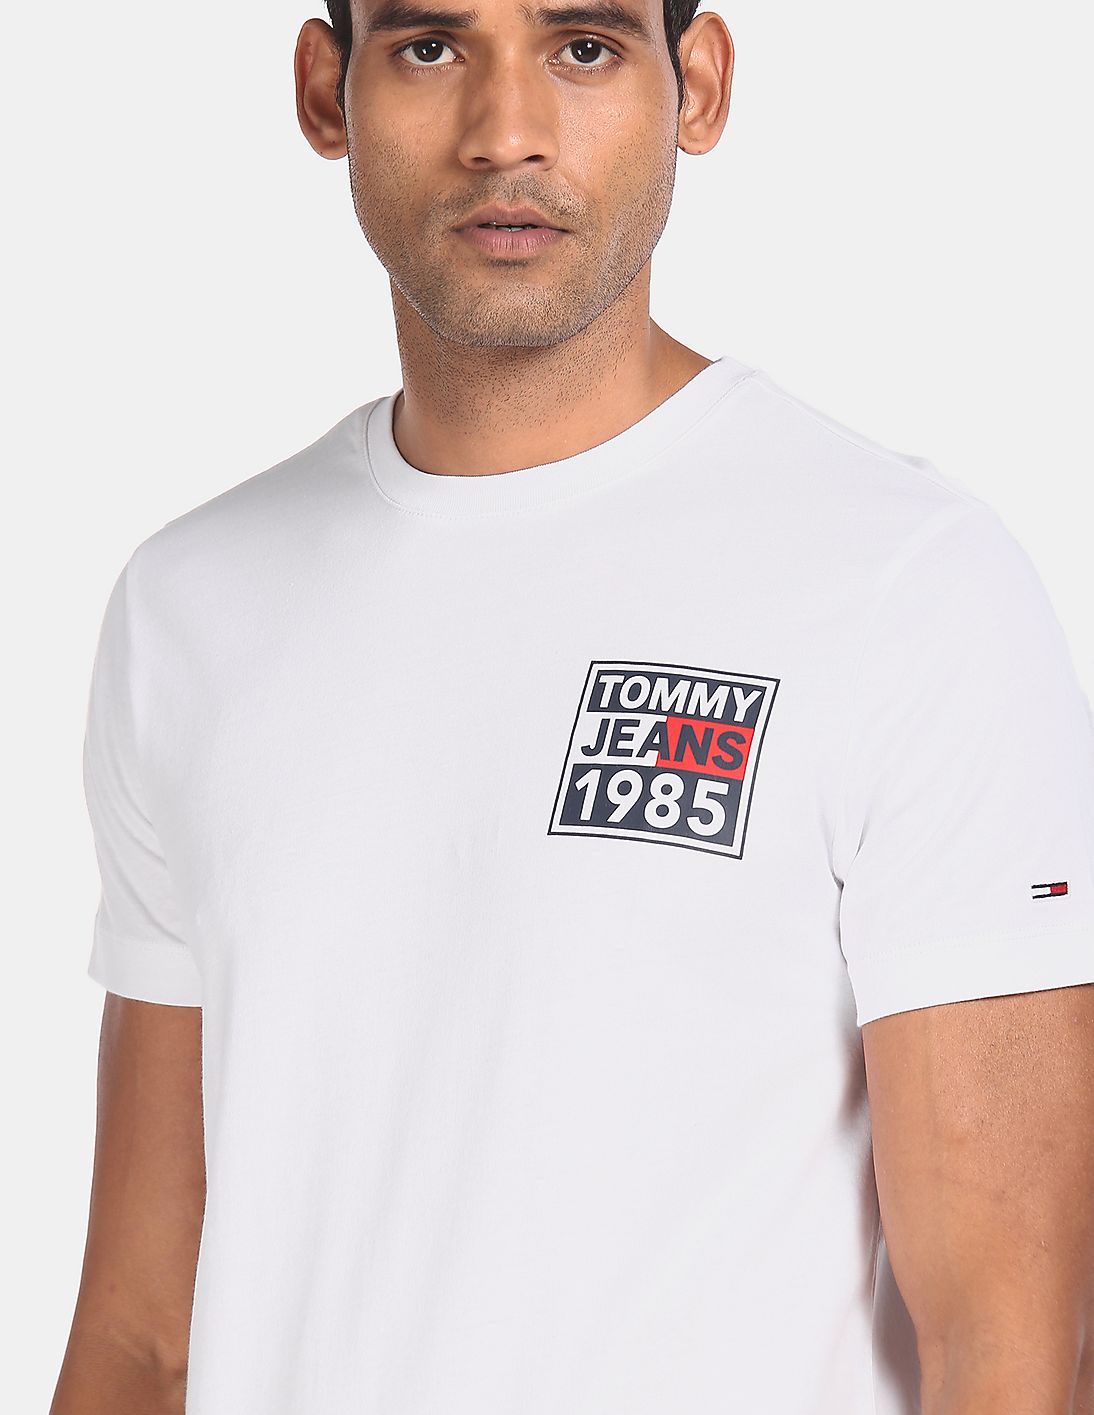 ÁO THUN TOMMY HILFIGER MEN WHITE COTTON FRONT AND BACK GRAPHIC PRINT T-SHIRT 9